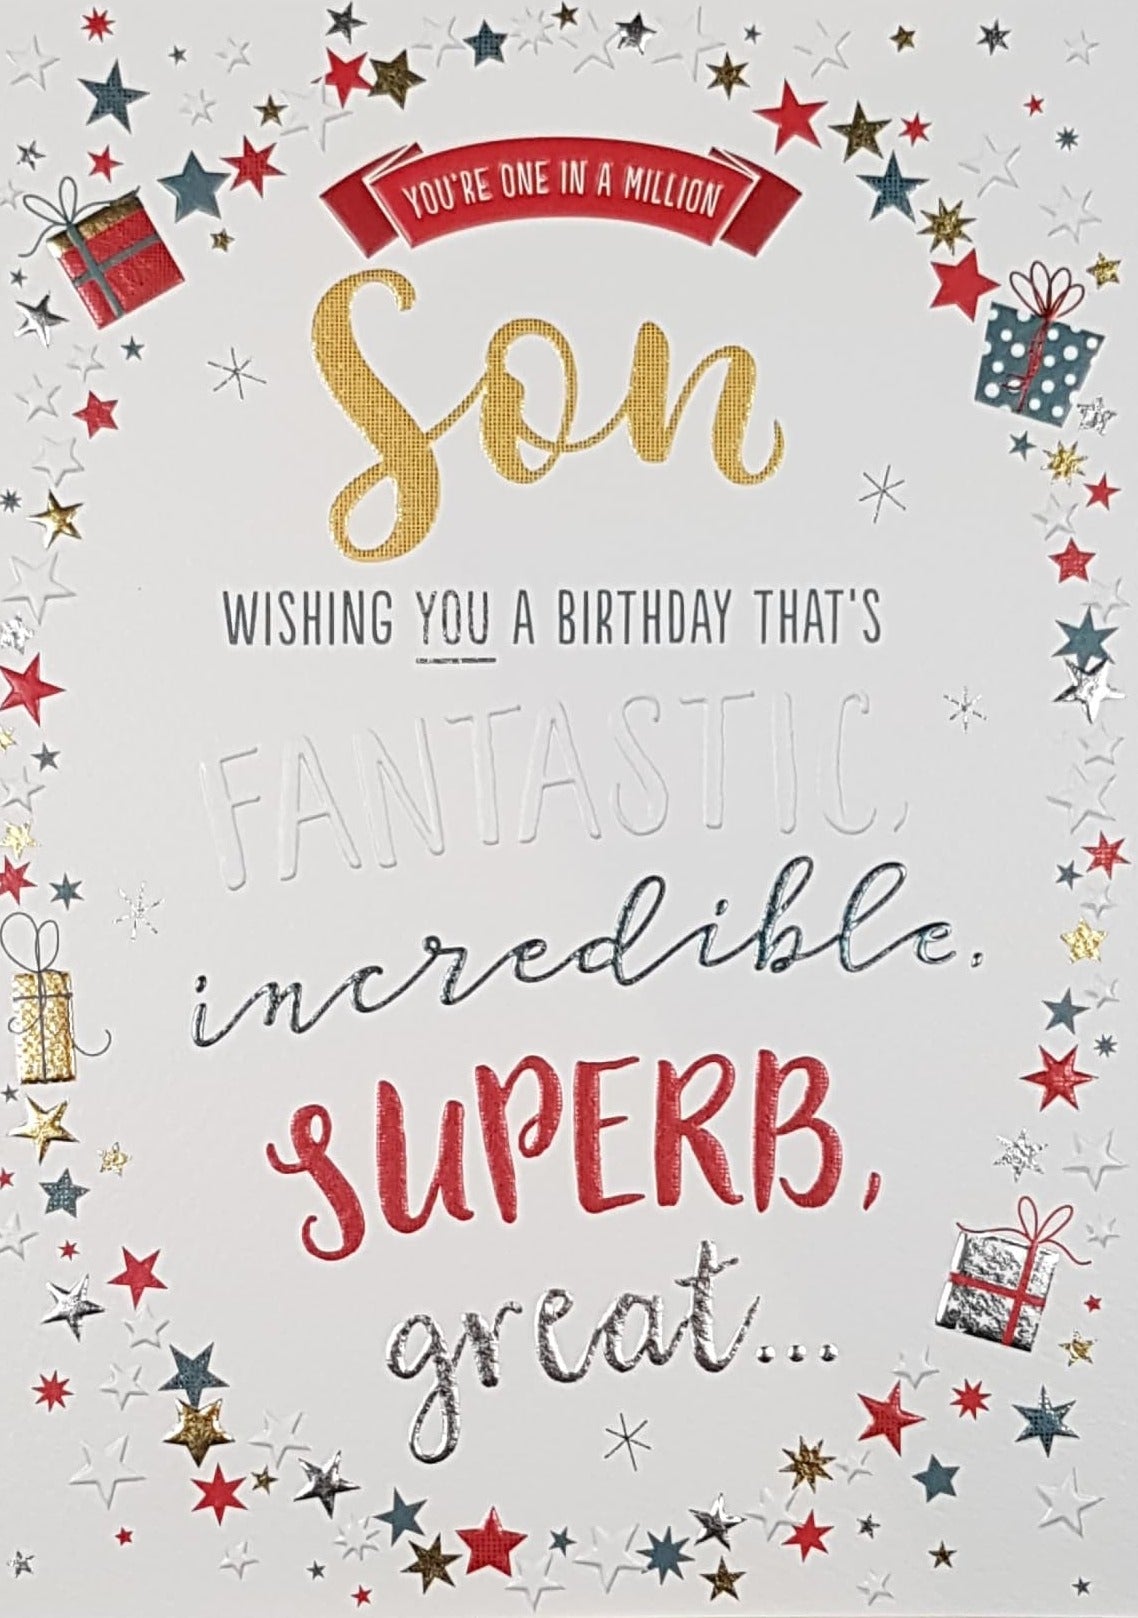 Birthday Card - Son / 'You're One In A Million' & A Star Wreath